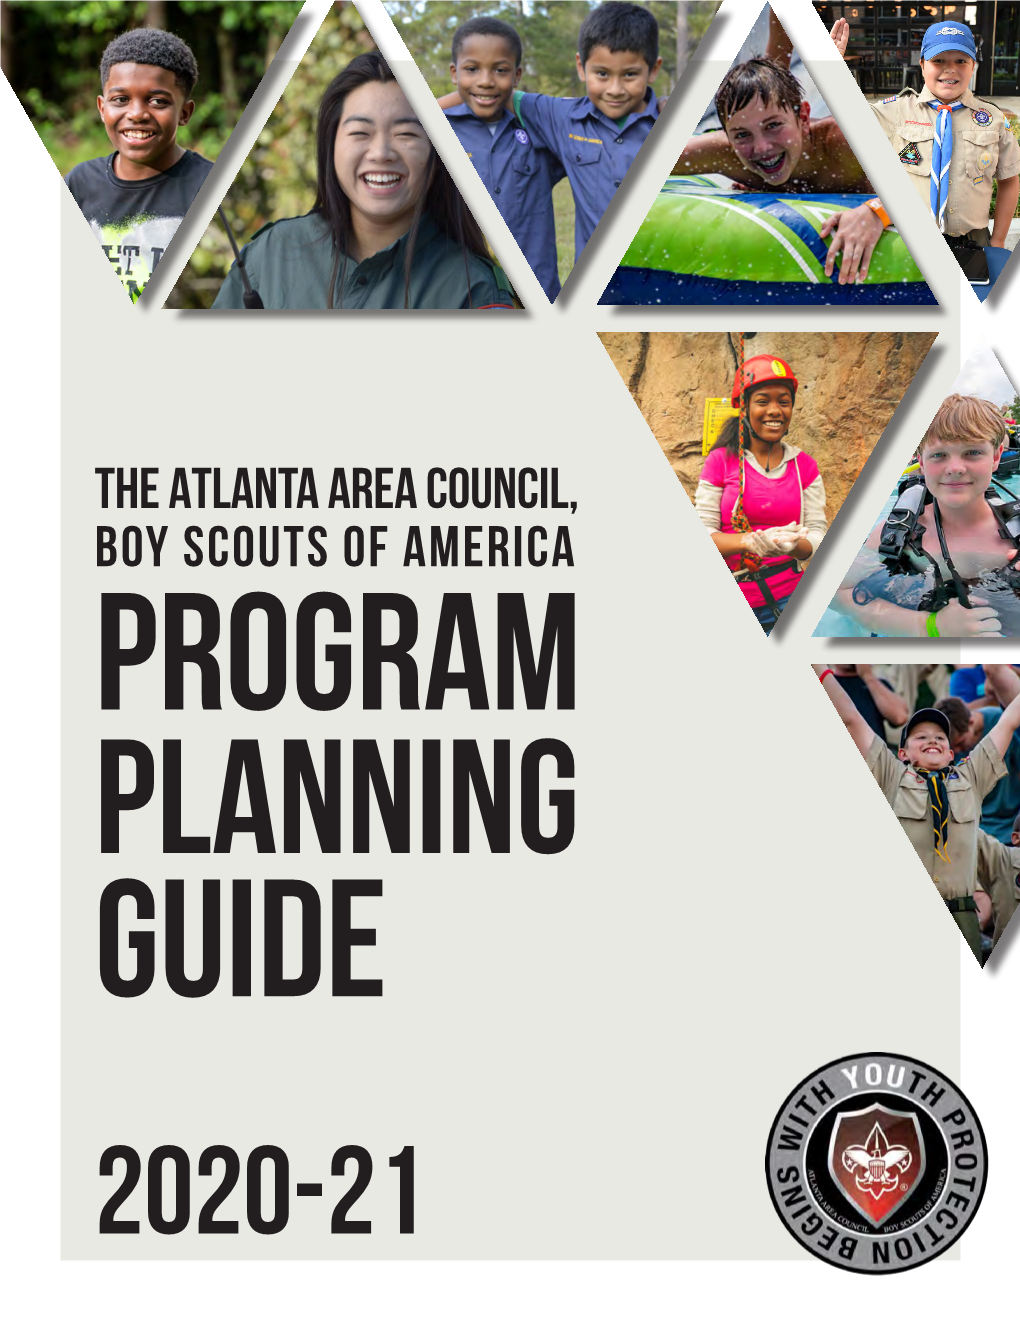 The Atlanta Area Council, Boy Scouts of America Program Planning Guide 2020-21